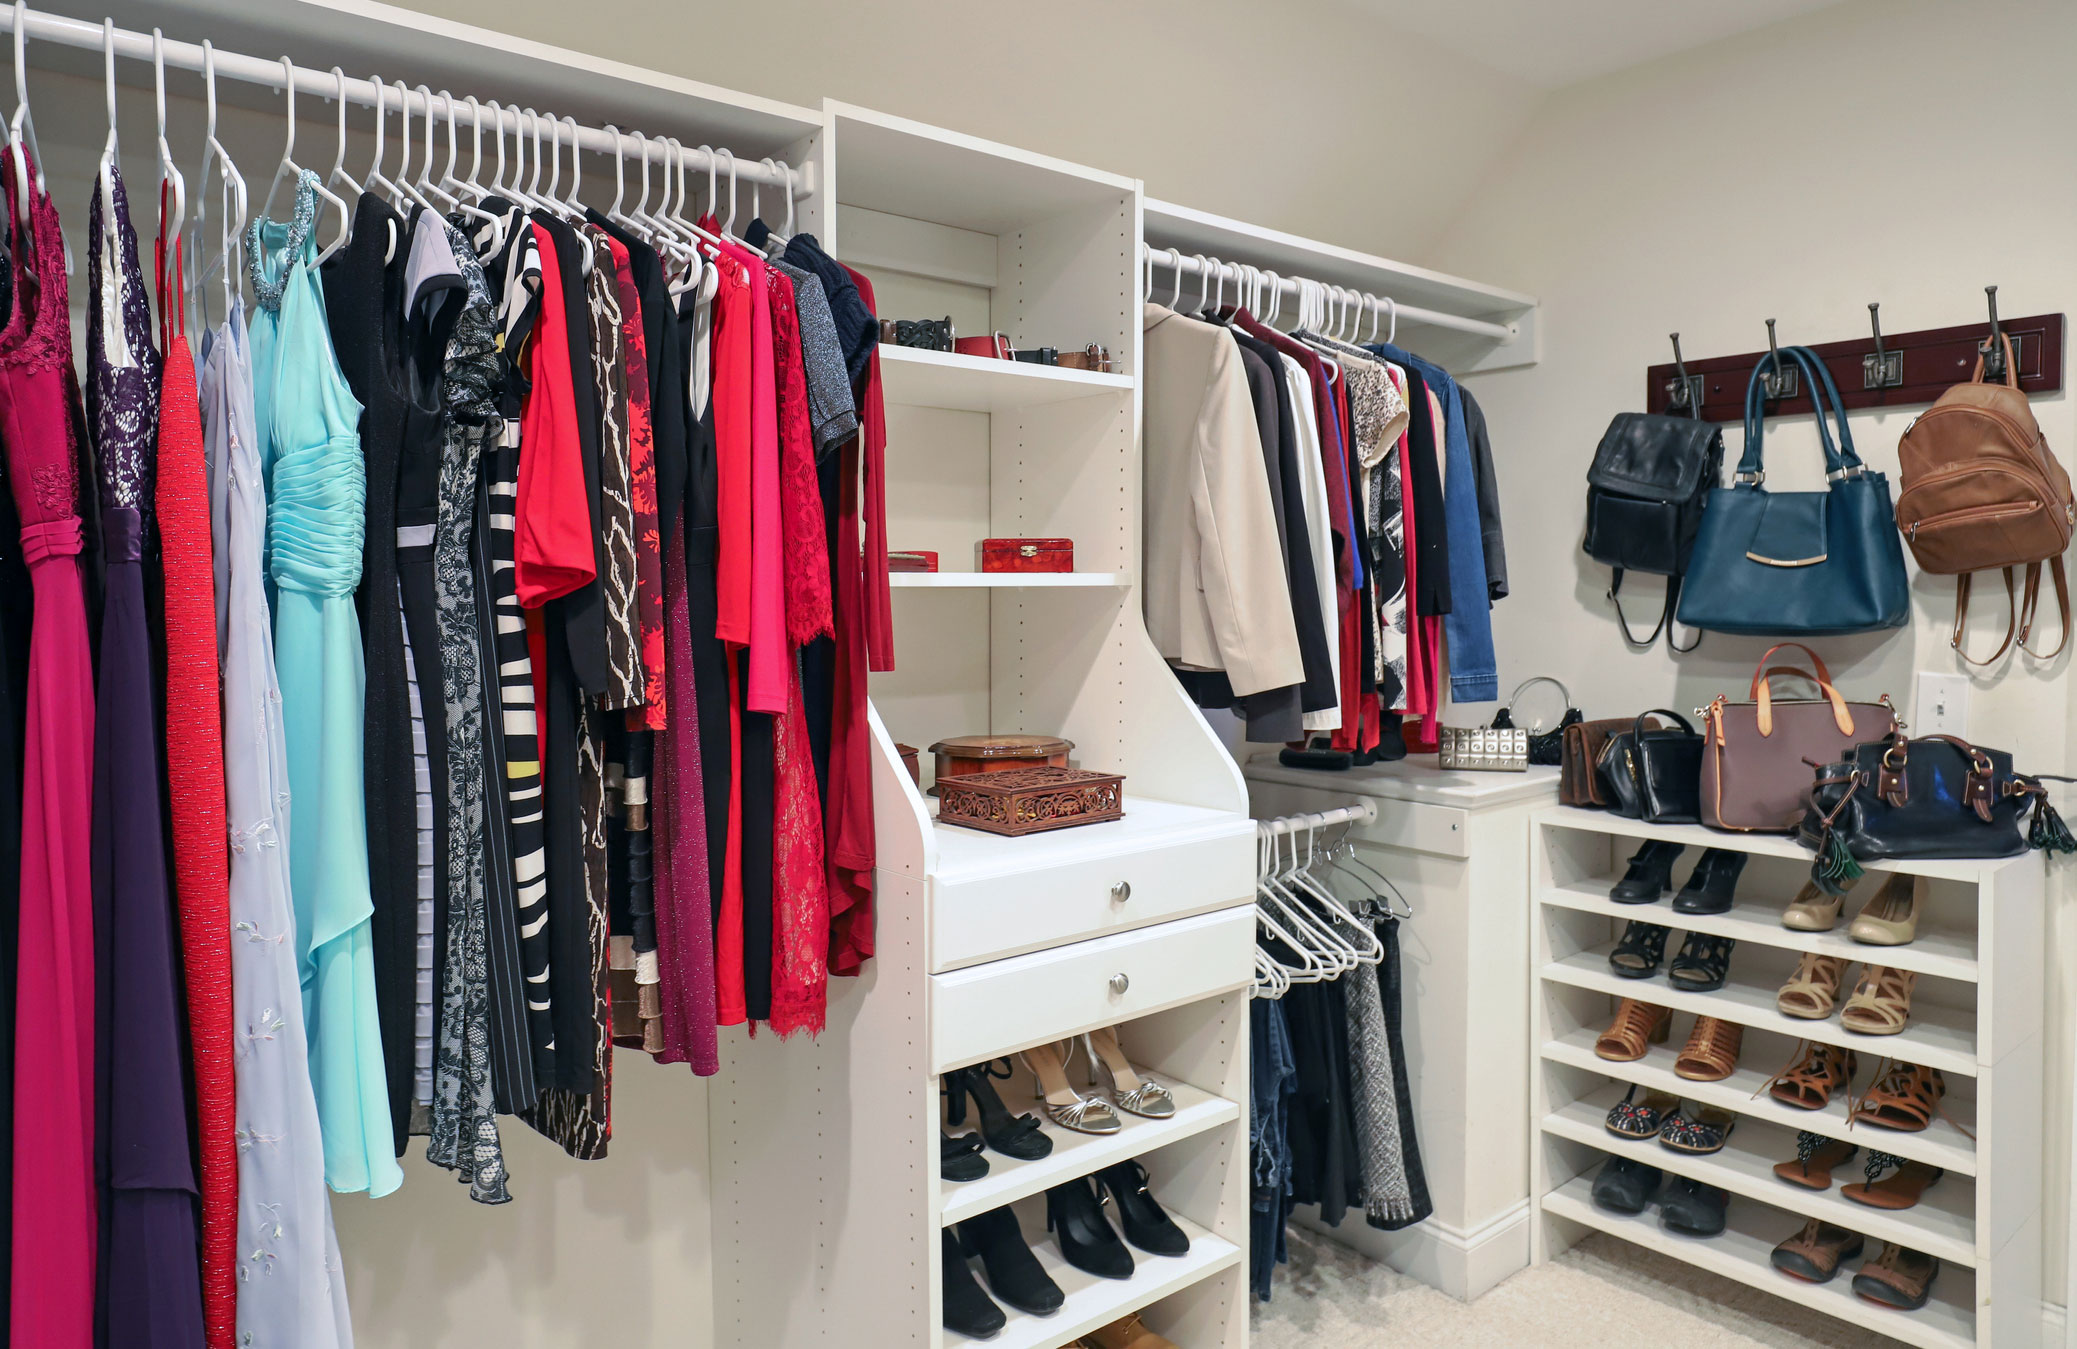 Organise Your Closet Genius Rules For Deciding Which Clothes To Keep